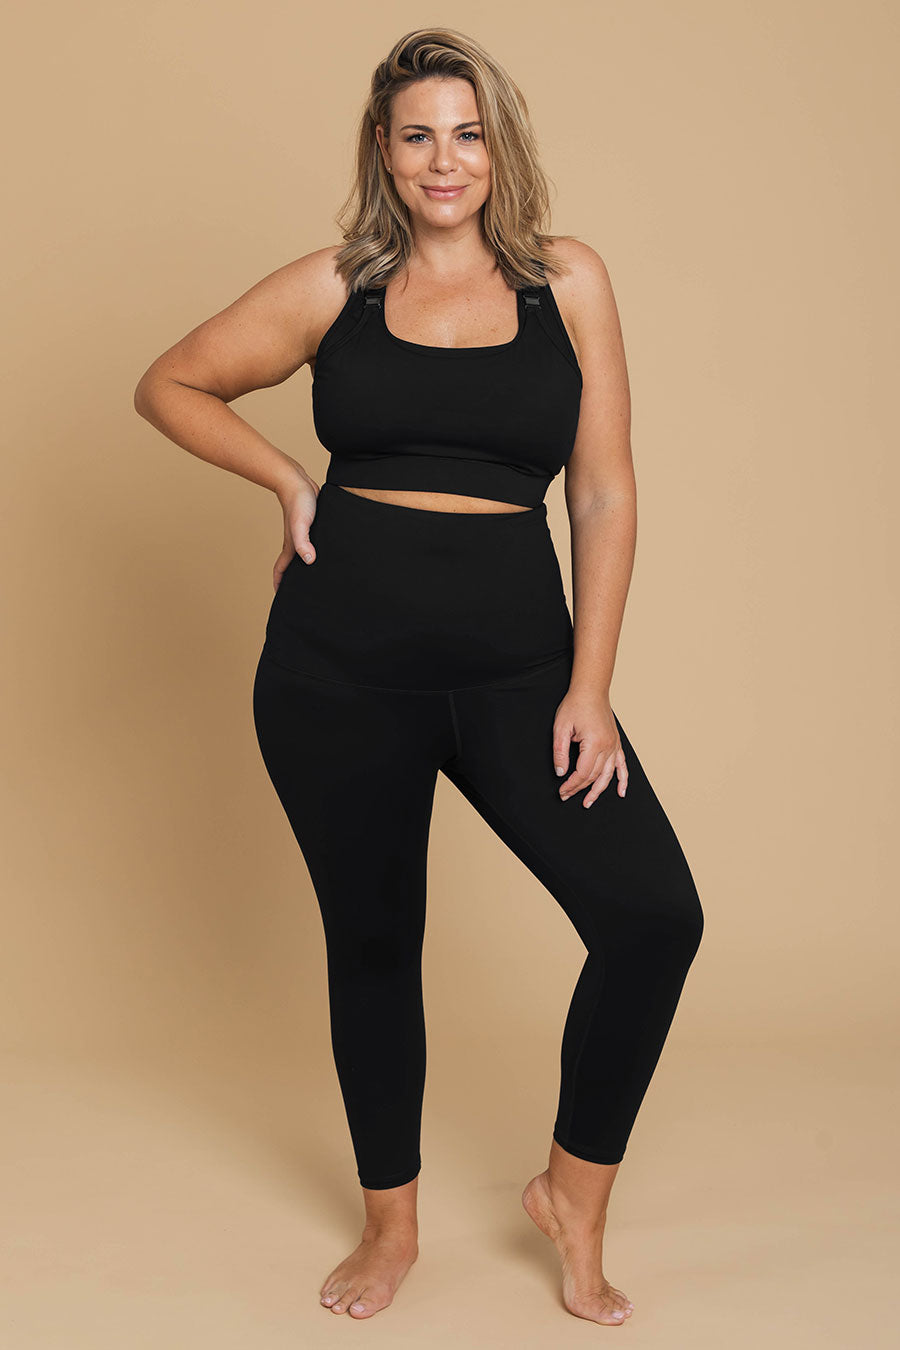 Cache Coeur Activ'Soft, Maternity Compression Tights 70 Denier, Black -  Light legs all day long! woman